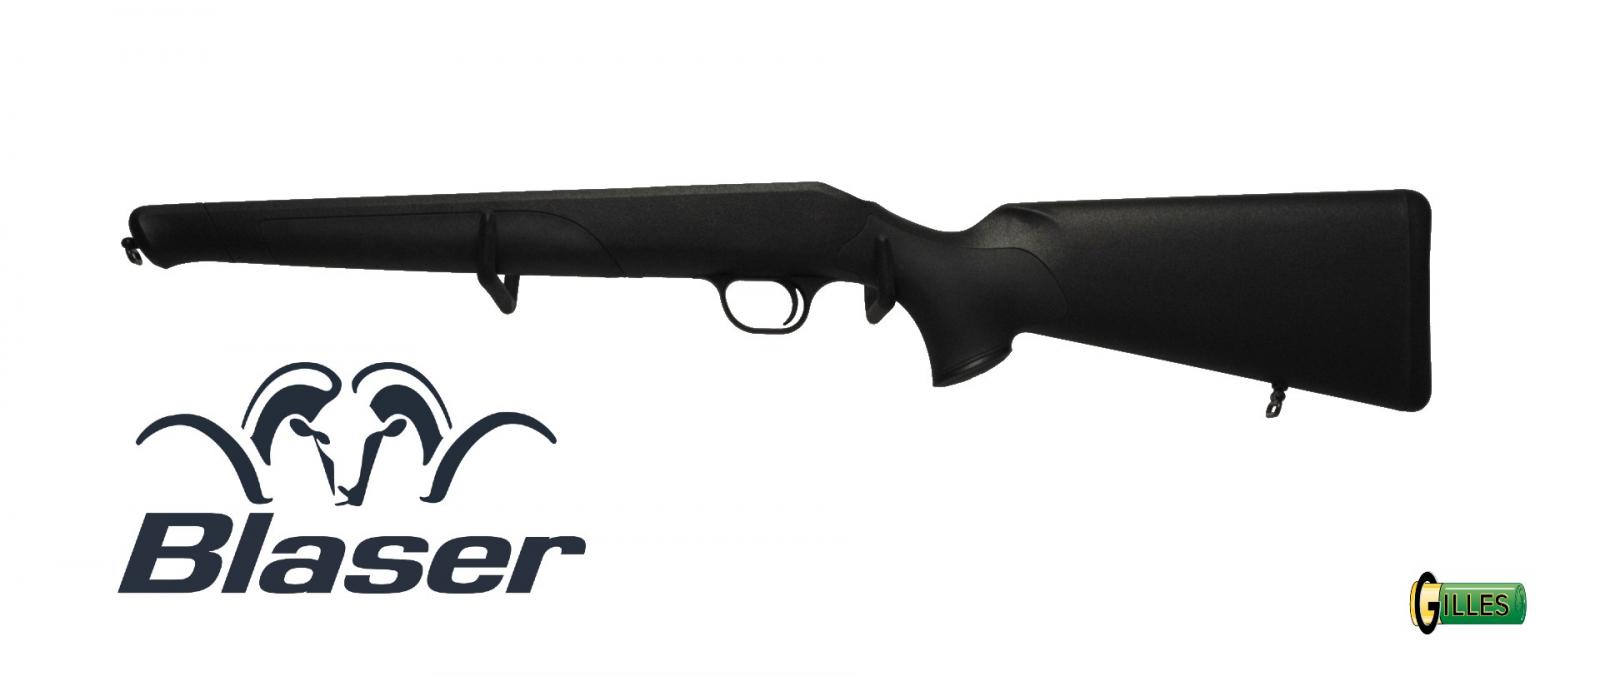 Carcasse BLASER R8 PROFESSIONAL XPO GAUCHER Chargeur fixe